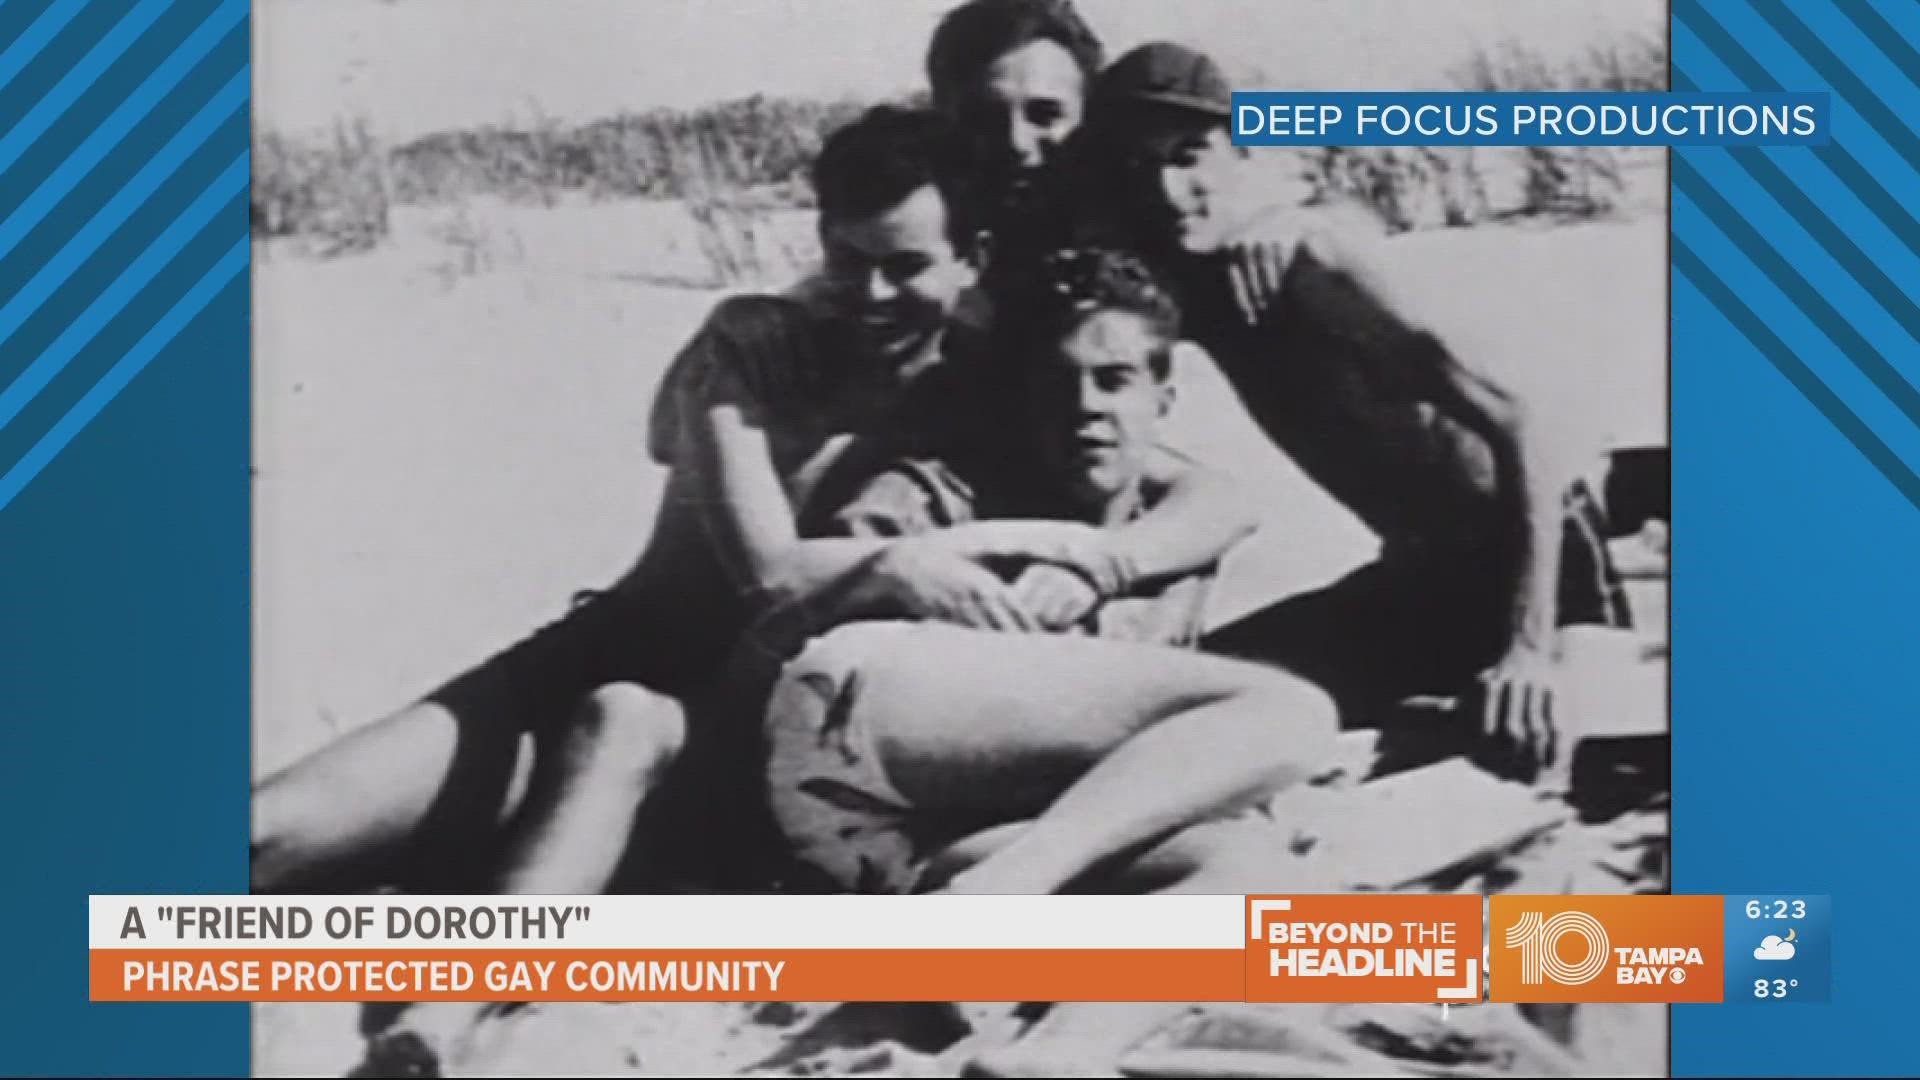 During WWII, people would say they were a 'friend of Dorothy' to talk about being part of the gay community.